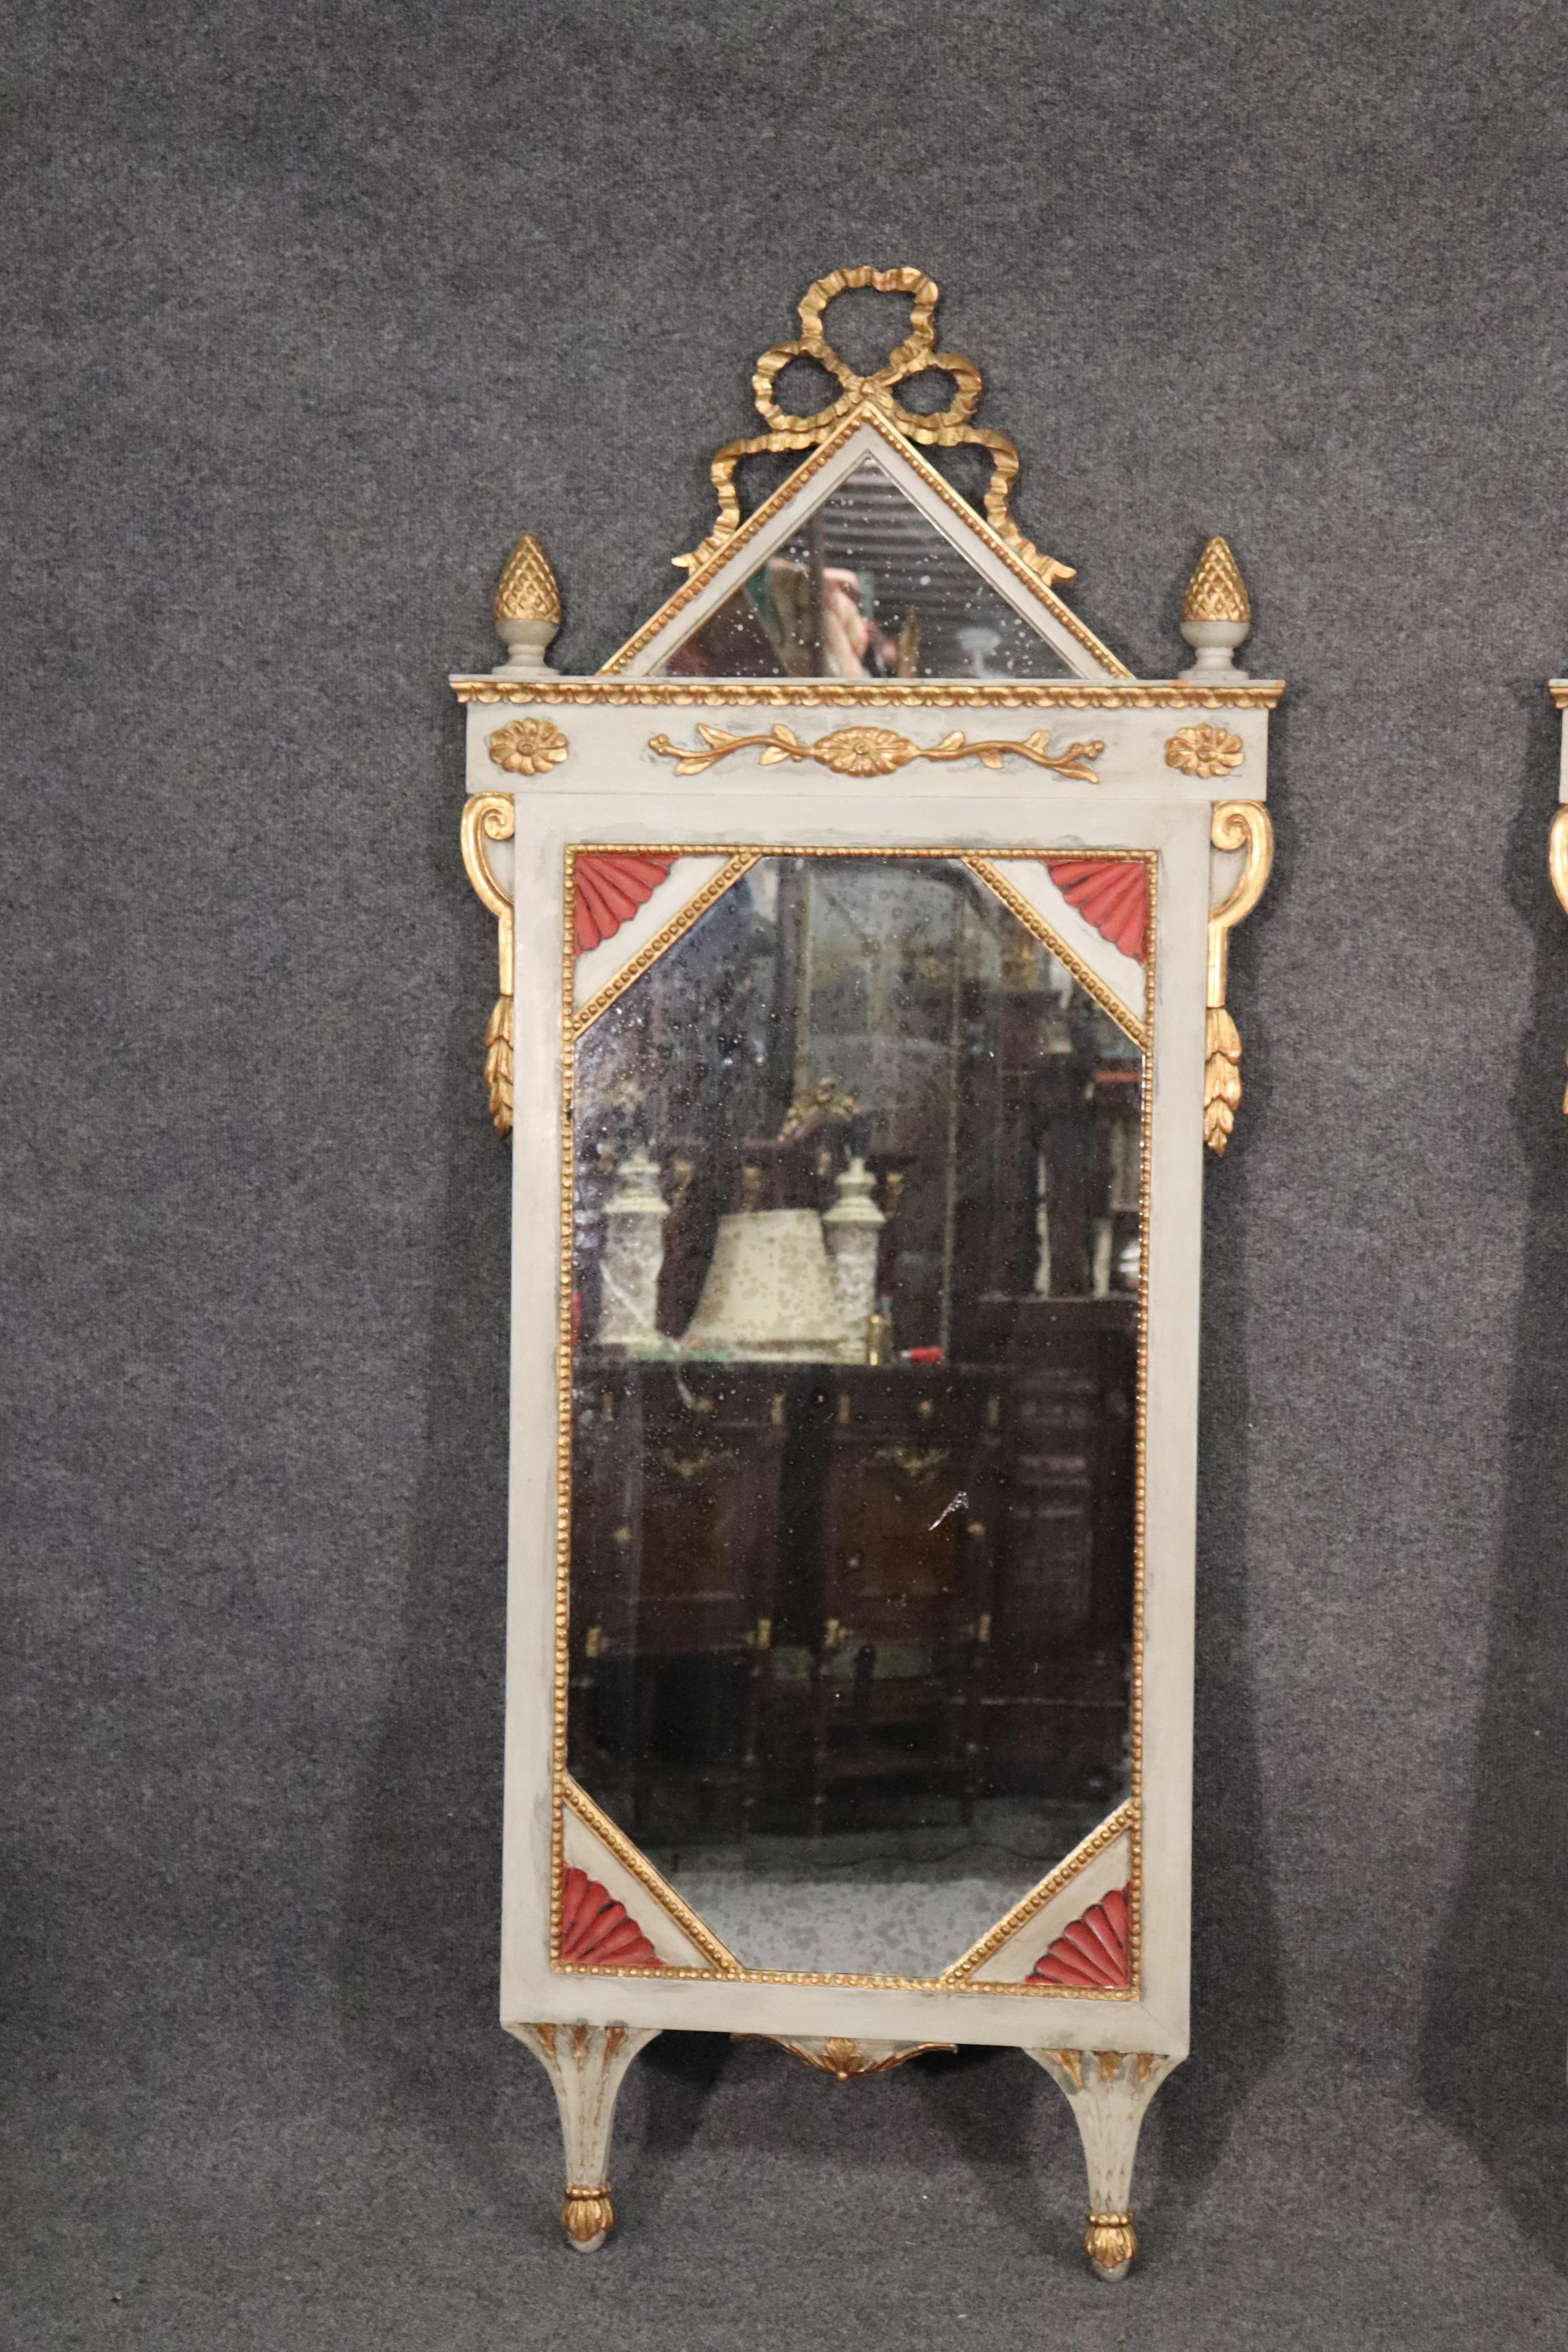 This is a hard to find pair of Venetian paint and gilded carved wood mirrors with their original patinated aged mirror plate glass, circa 1840. They are in good antique condition and will show age spots on the genuine silver mirror plate backs. The